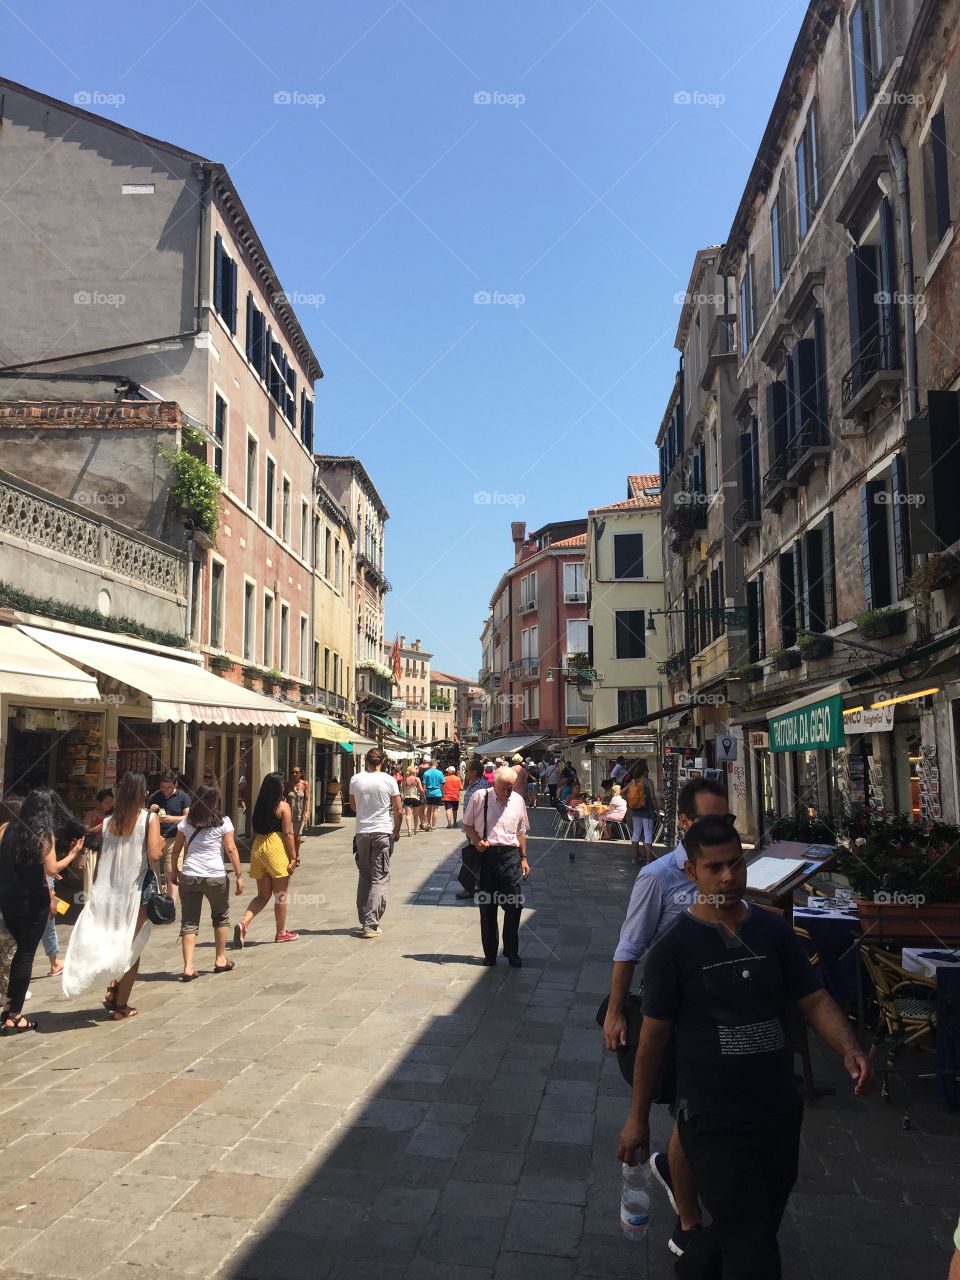 Walking the streets of Venice 